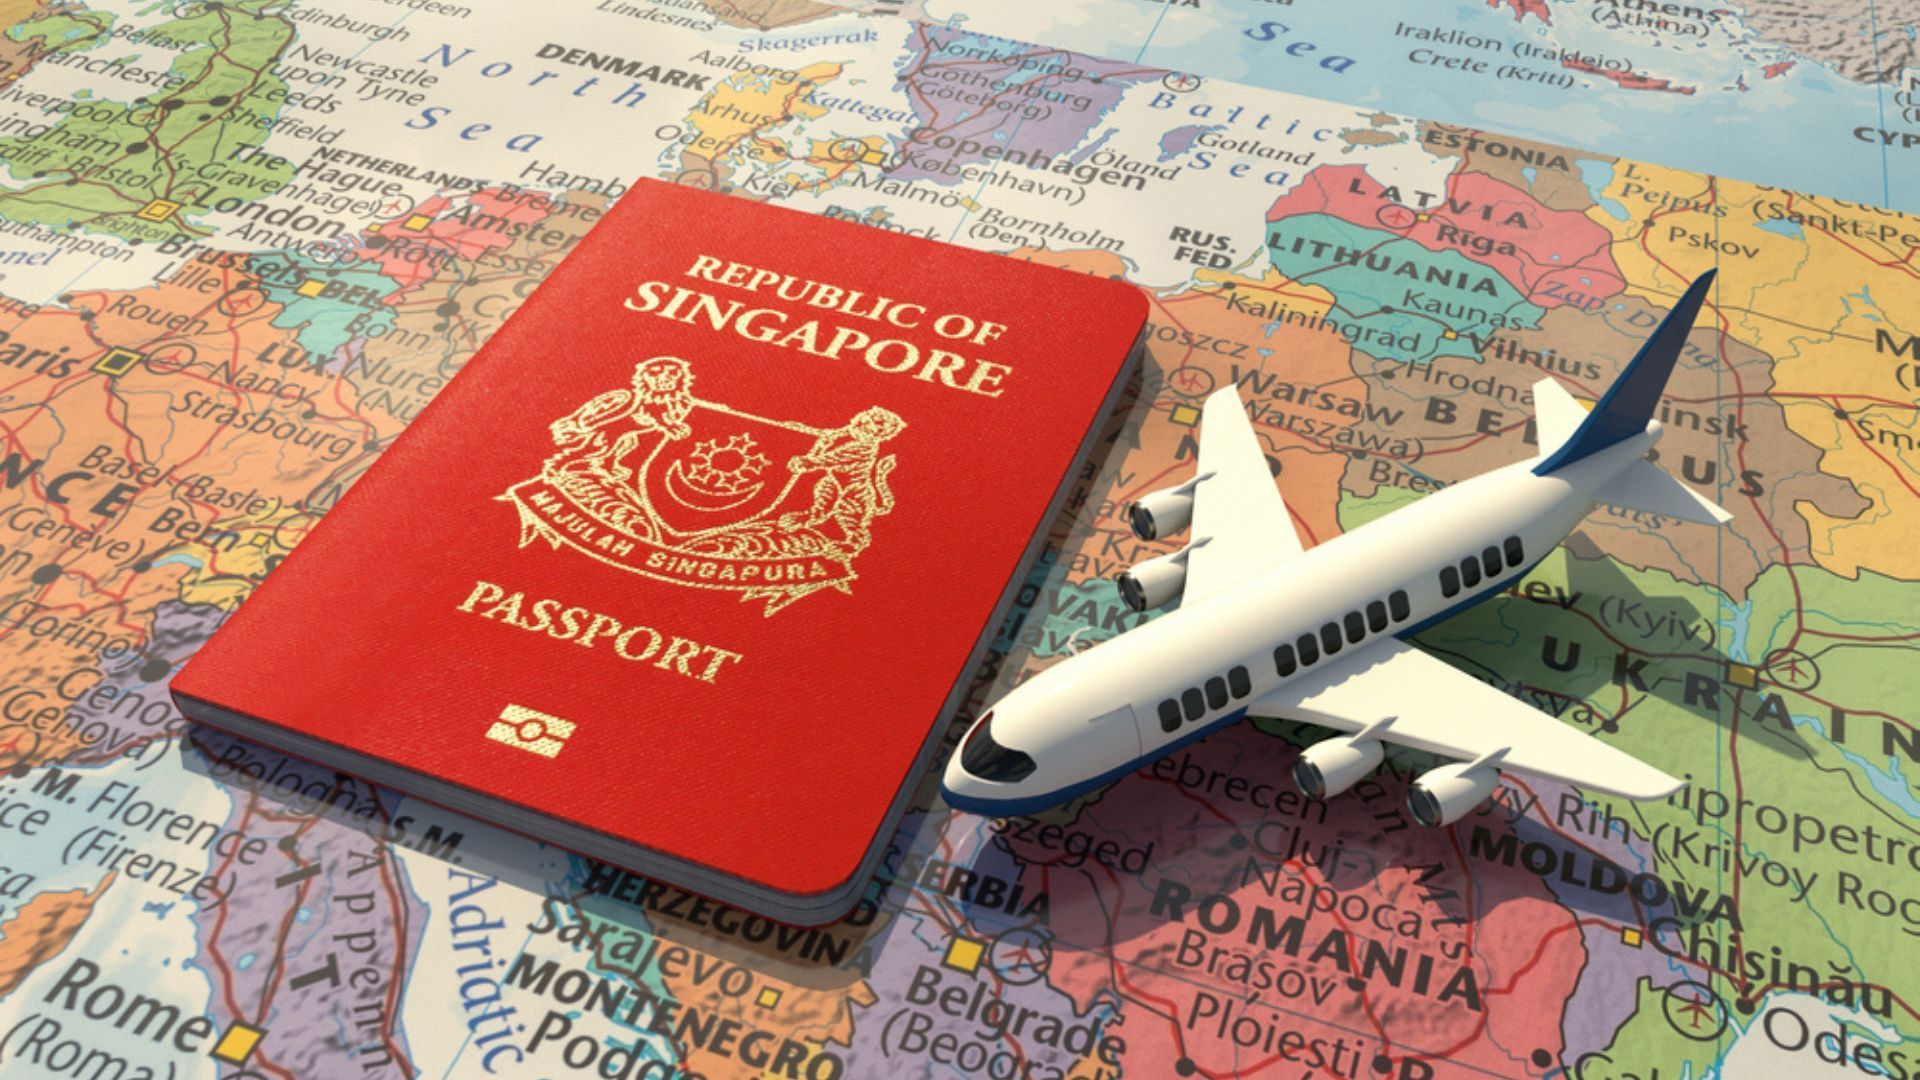 Forbes Middle East English - Singapore has the most powerful passport in  the world, allowing its citizens to visit 192 travel destinations out of  227 around the world without a visa. #Forbes